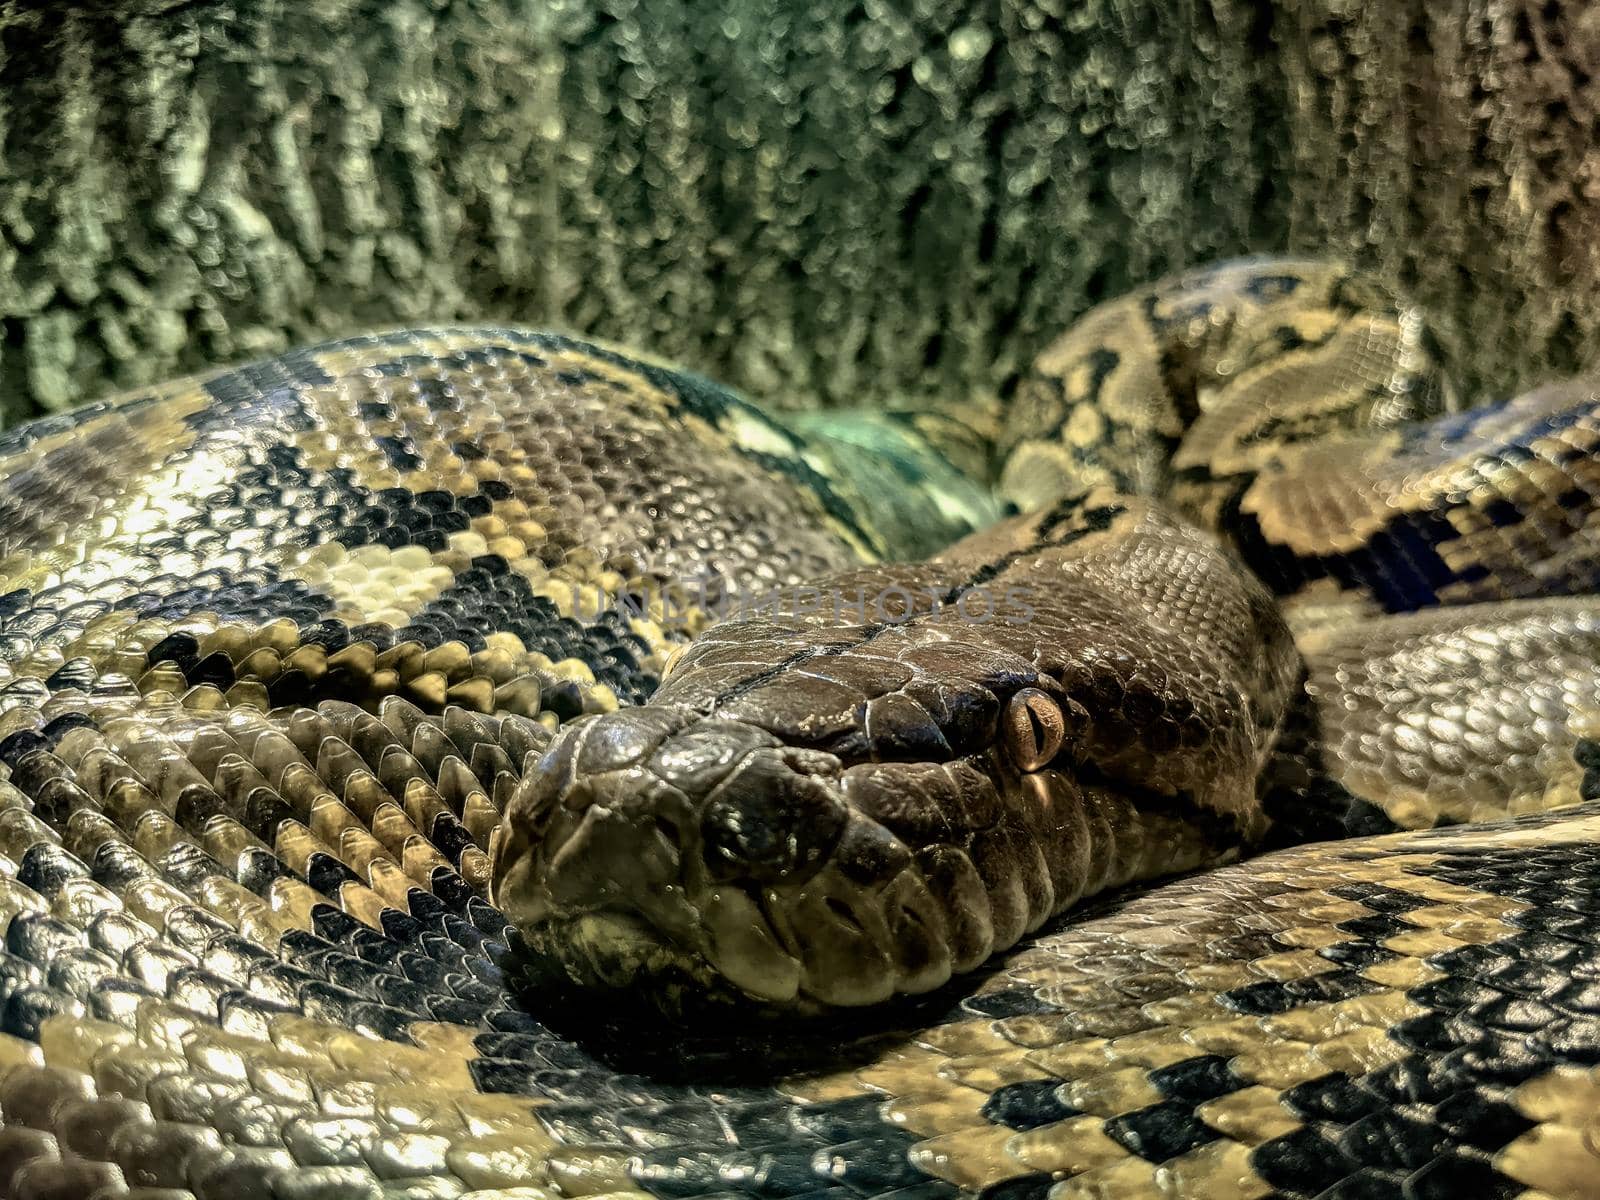 Close up of The longest snake in the world - Asian giant Reticulated Python. Quietly asleep, curled into a ring by dugulan